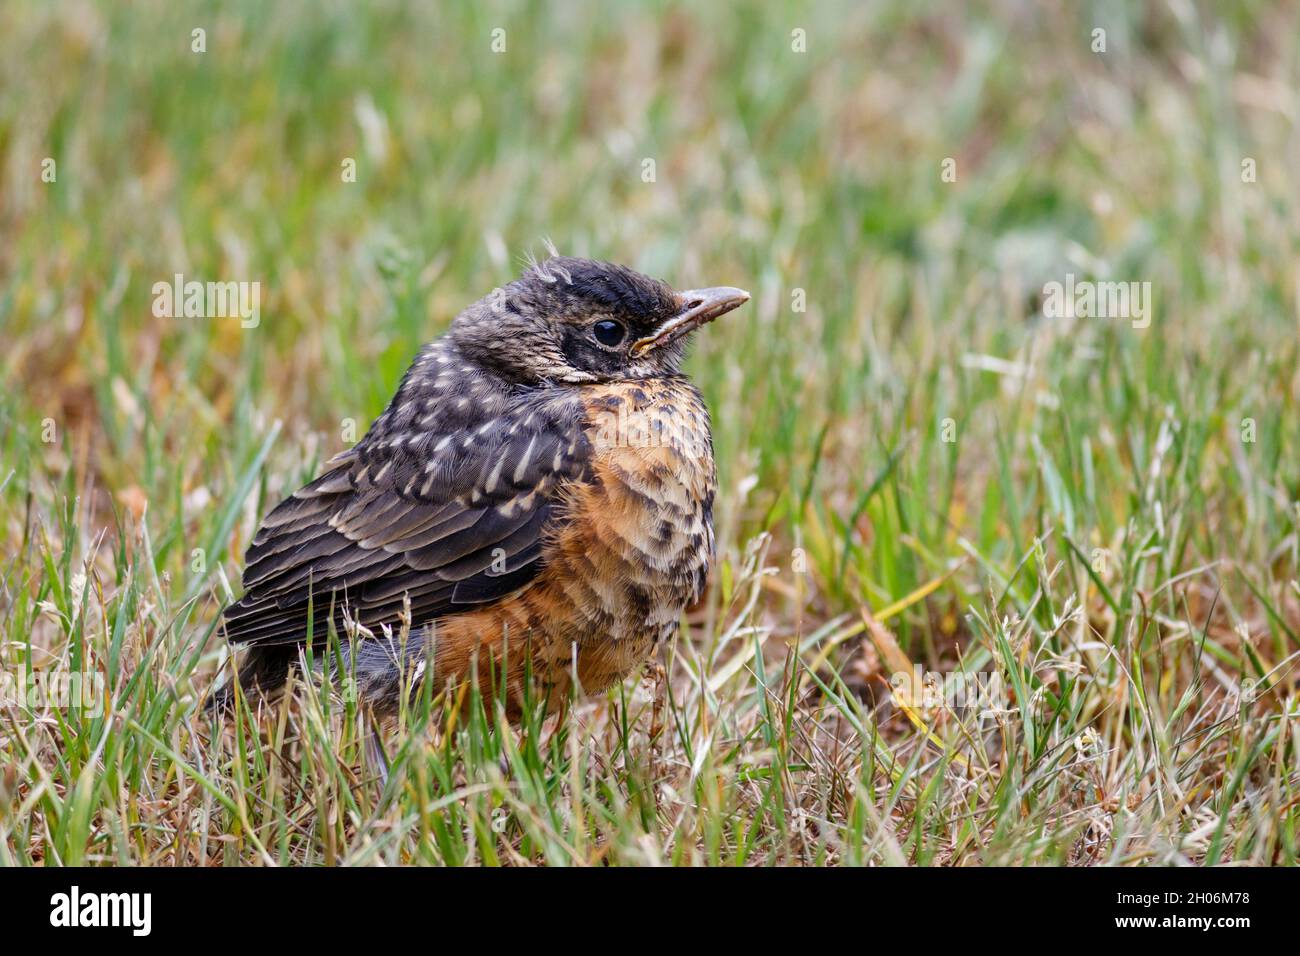 An alert American robin fledgling just out of the nest stands on an untidy lawn, its flight feathers still short and plumage ruffled (eye level view). Stock Photo